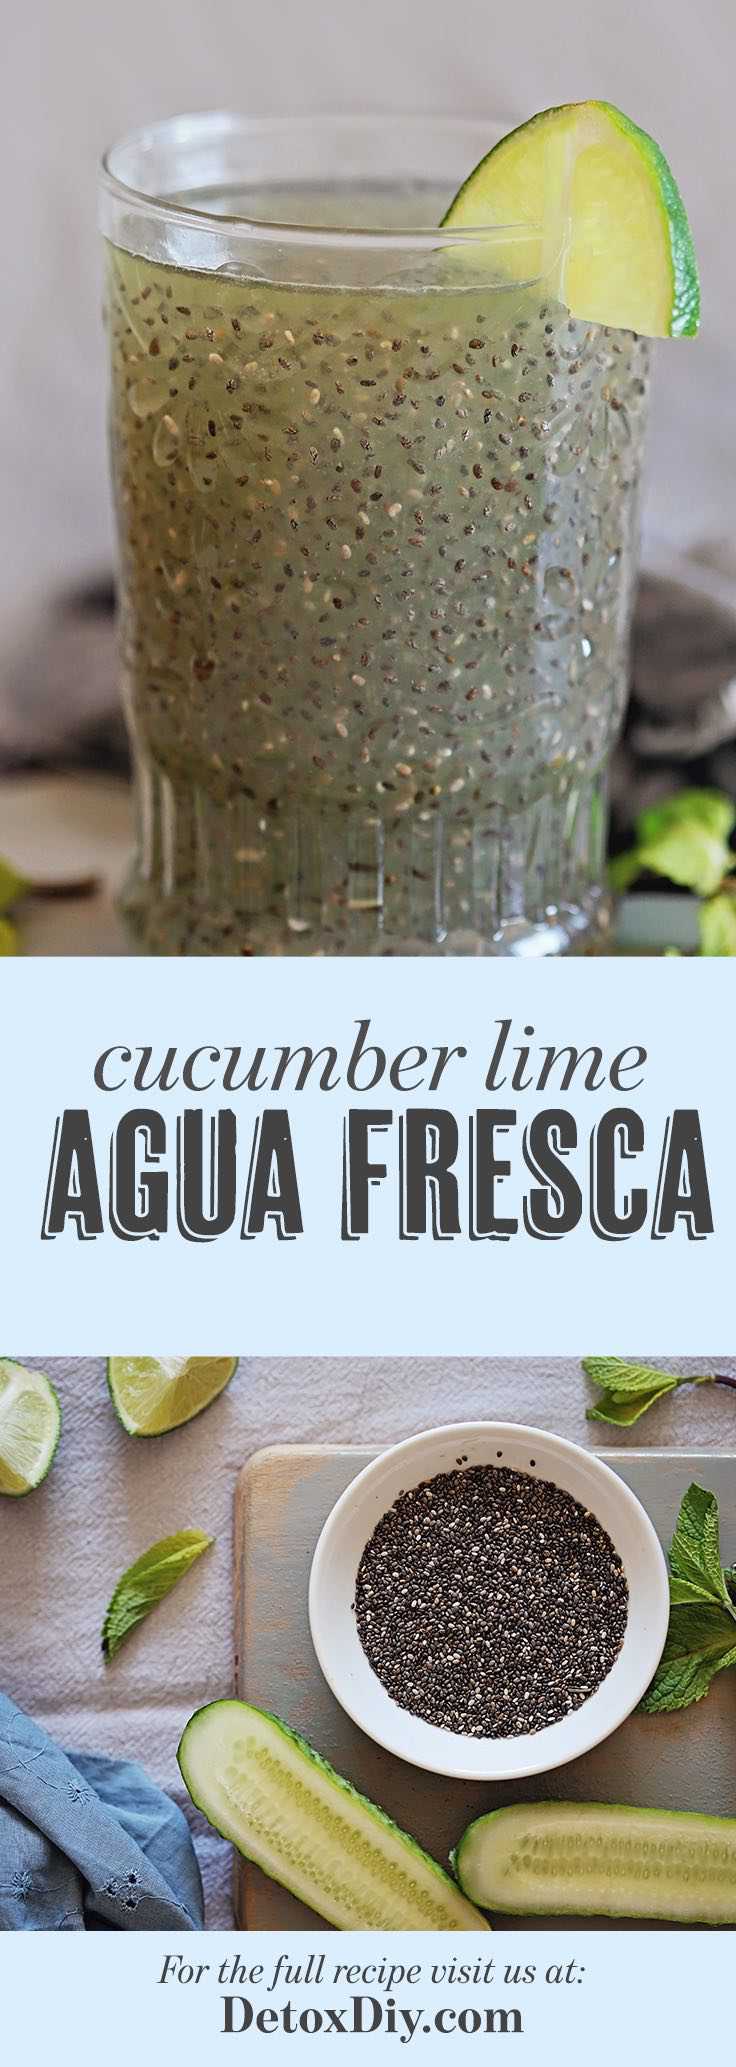 This cucumber lime agua fresca makes the most refreshing and hydrating drink!